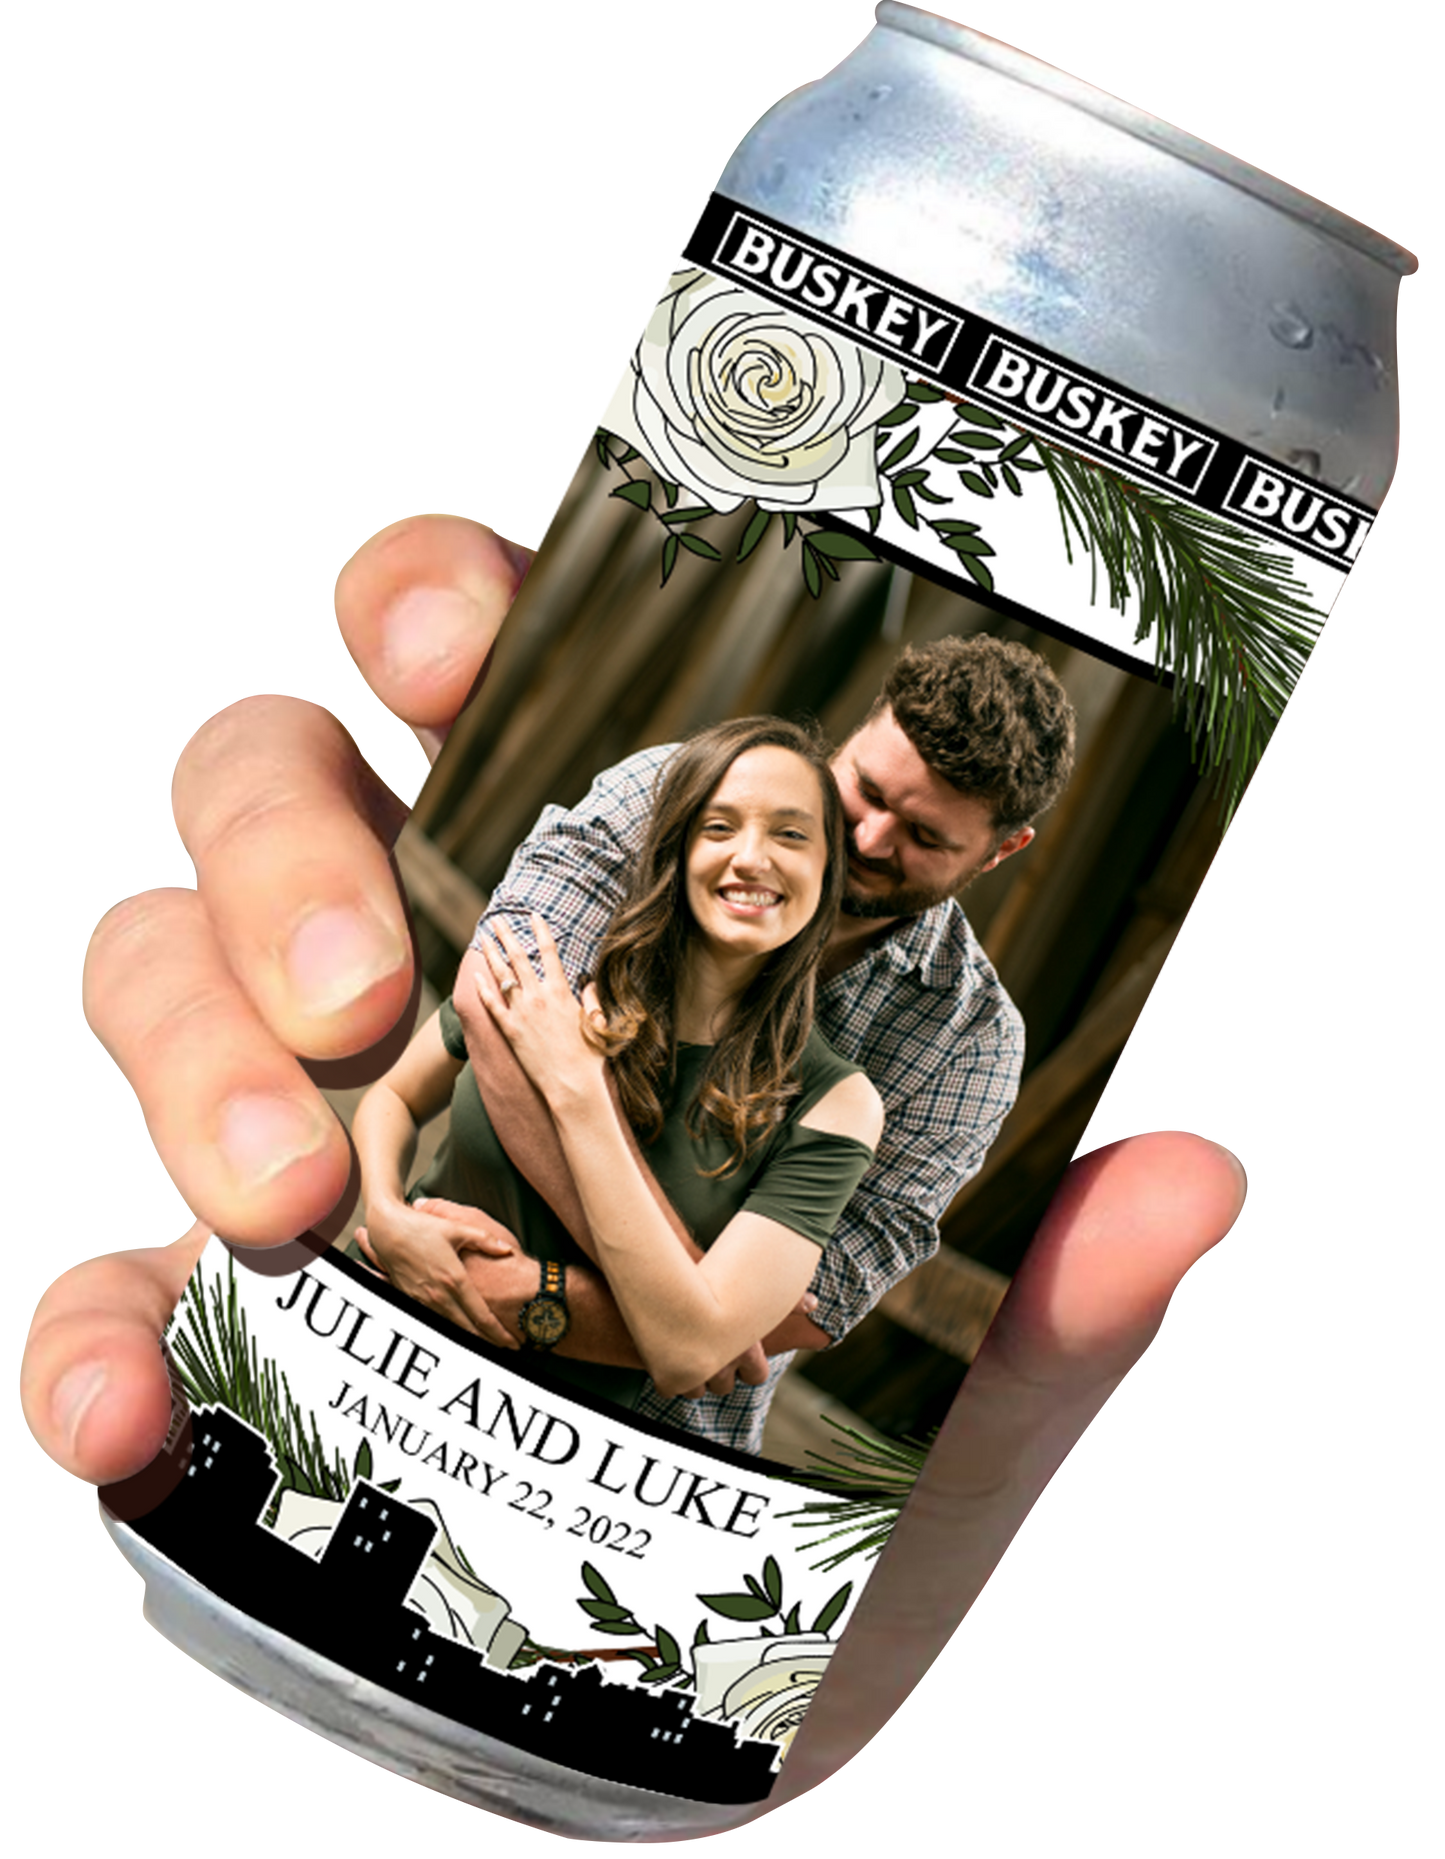 Personalized Wedding Cans by Buskey Cider